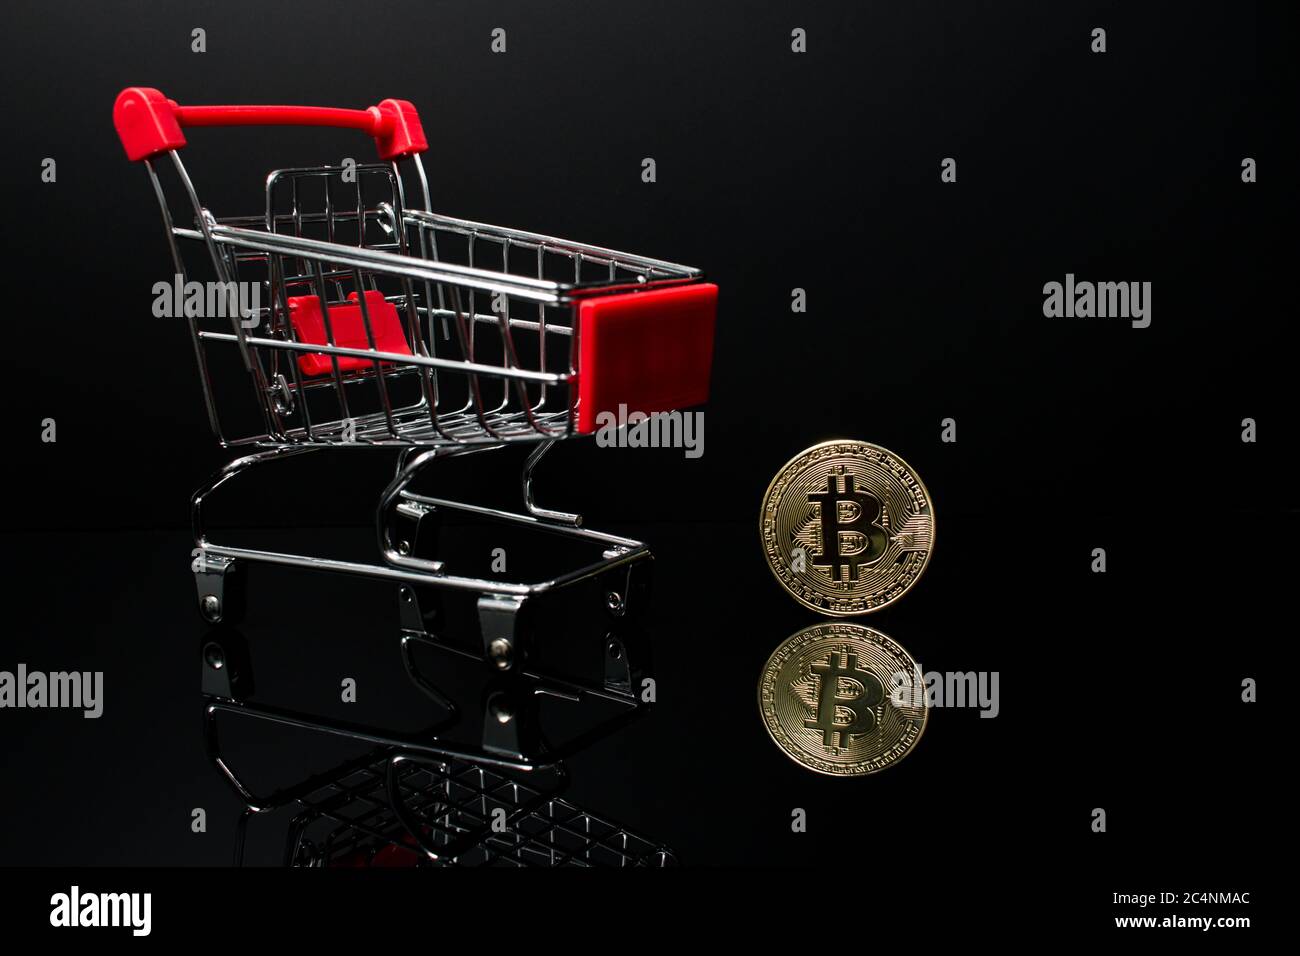 A shopping cart with a crypto currency Bitcoin coin next to it with a black background. Stock Photo